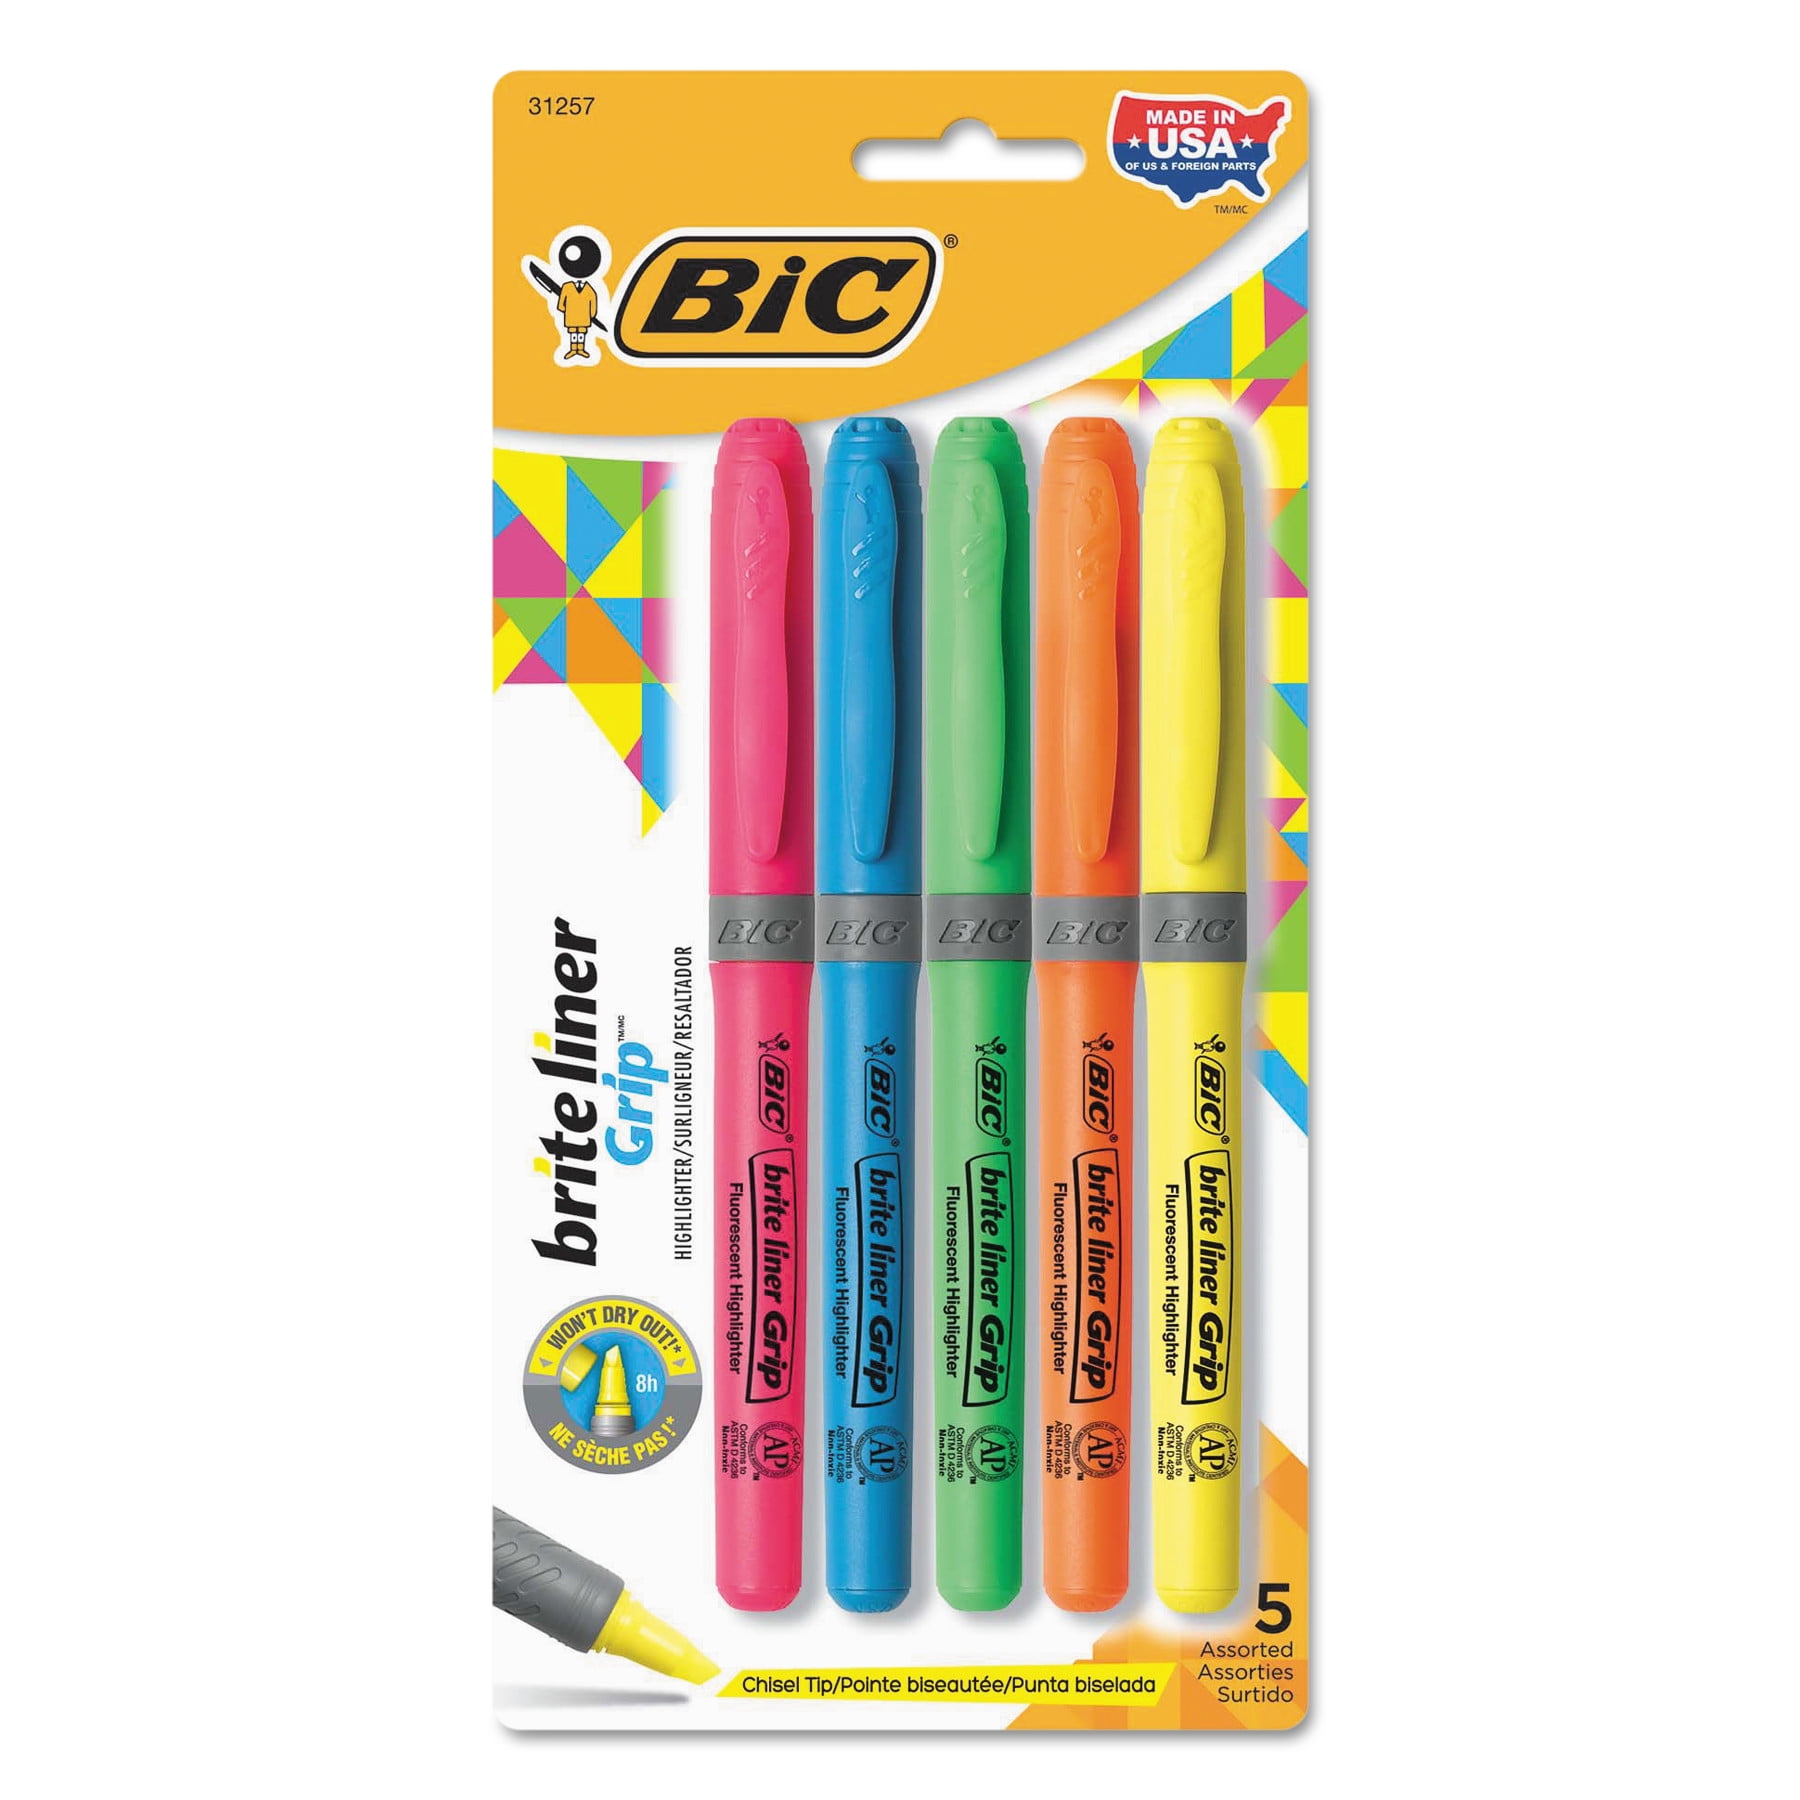 BIC Brite Liner Grip Highlighters, Assorted Colors - 5 count